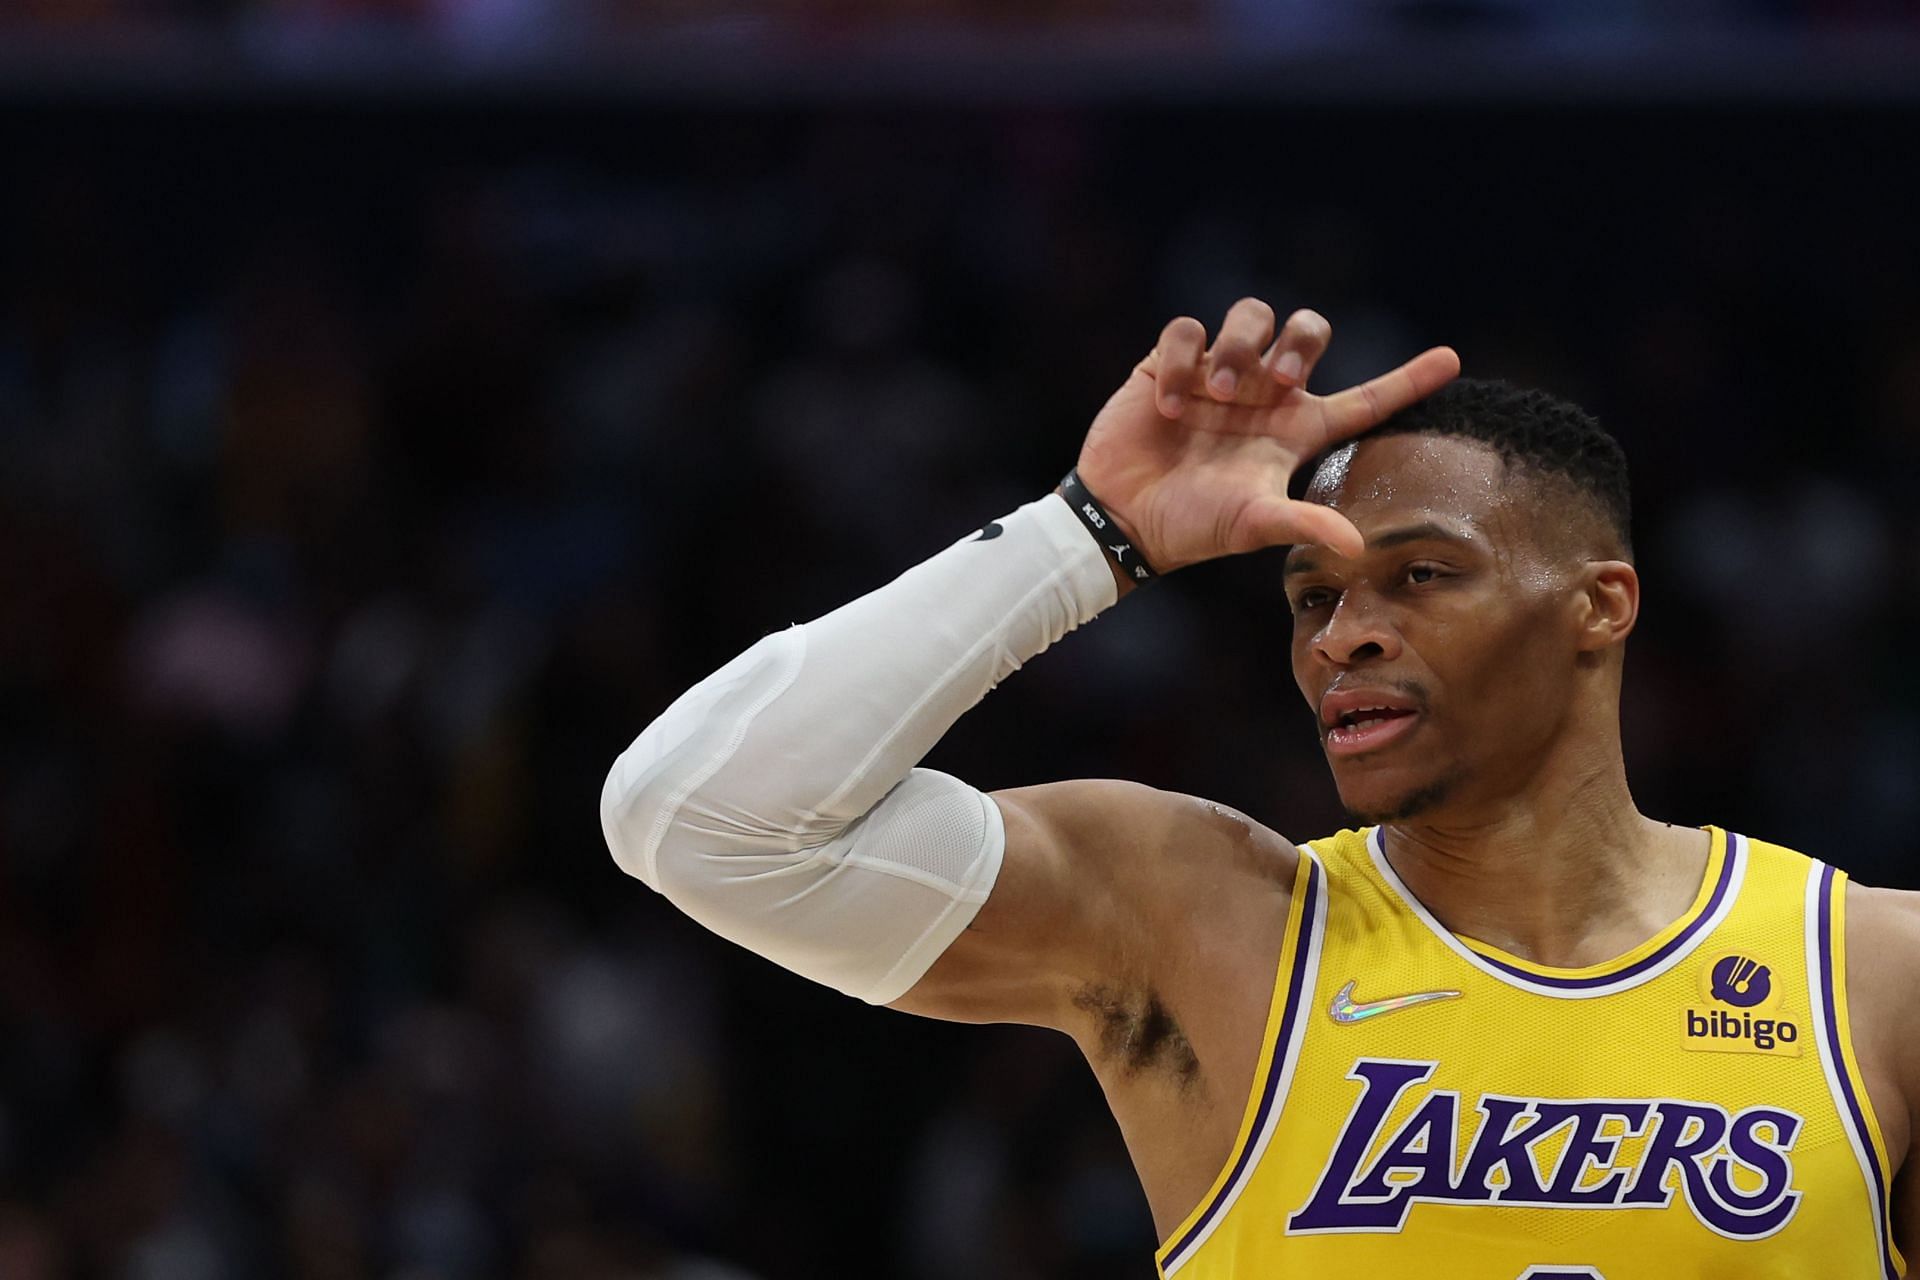 Russell Westbrook of the LA Lakers in action against the Washington Wizards